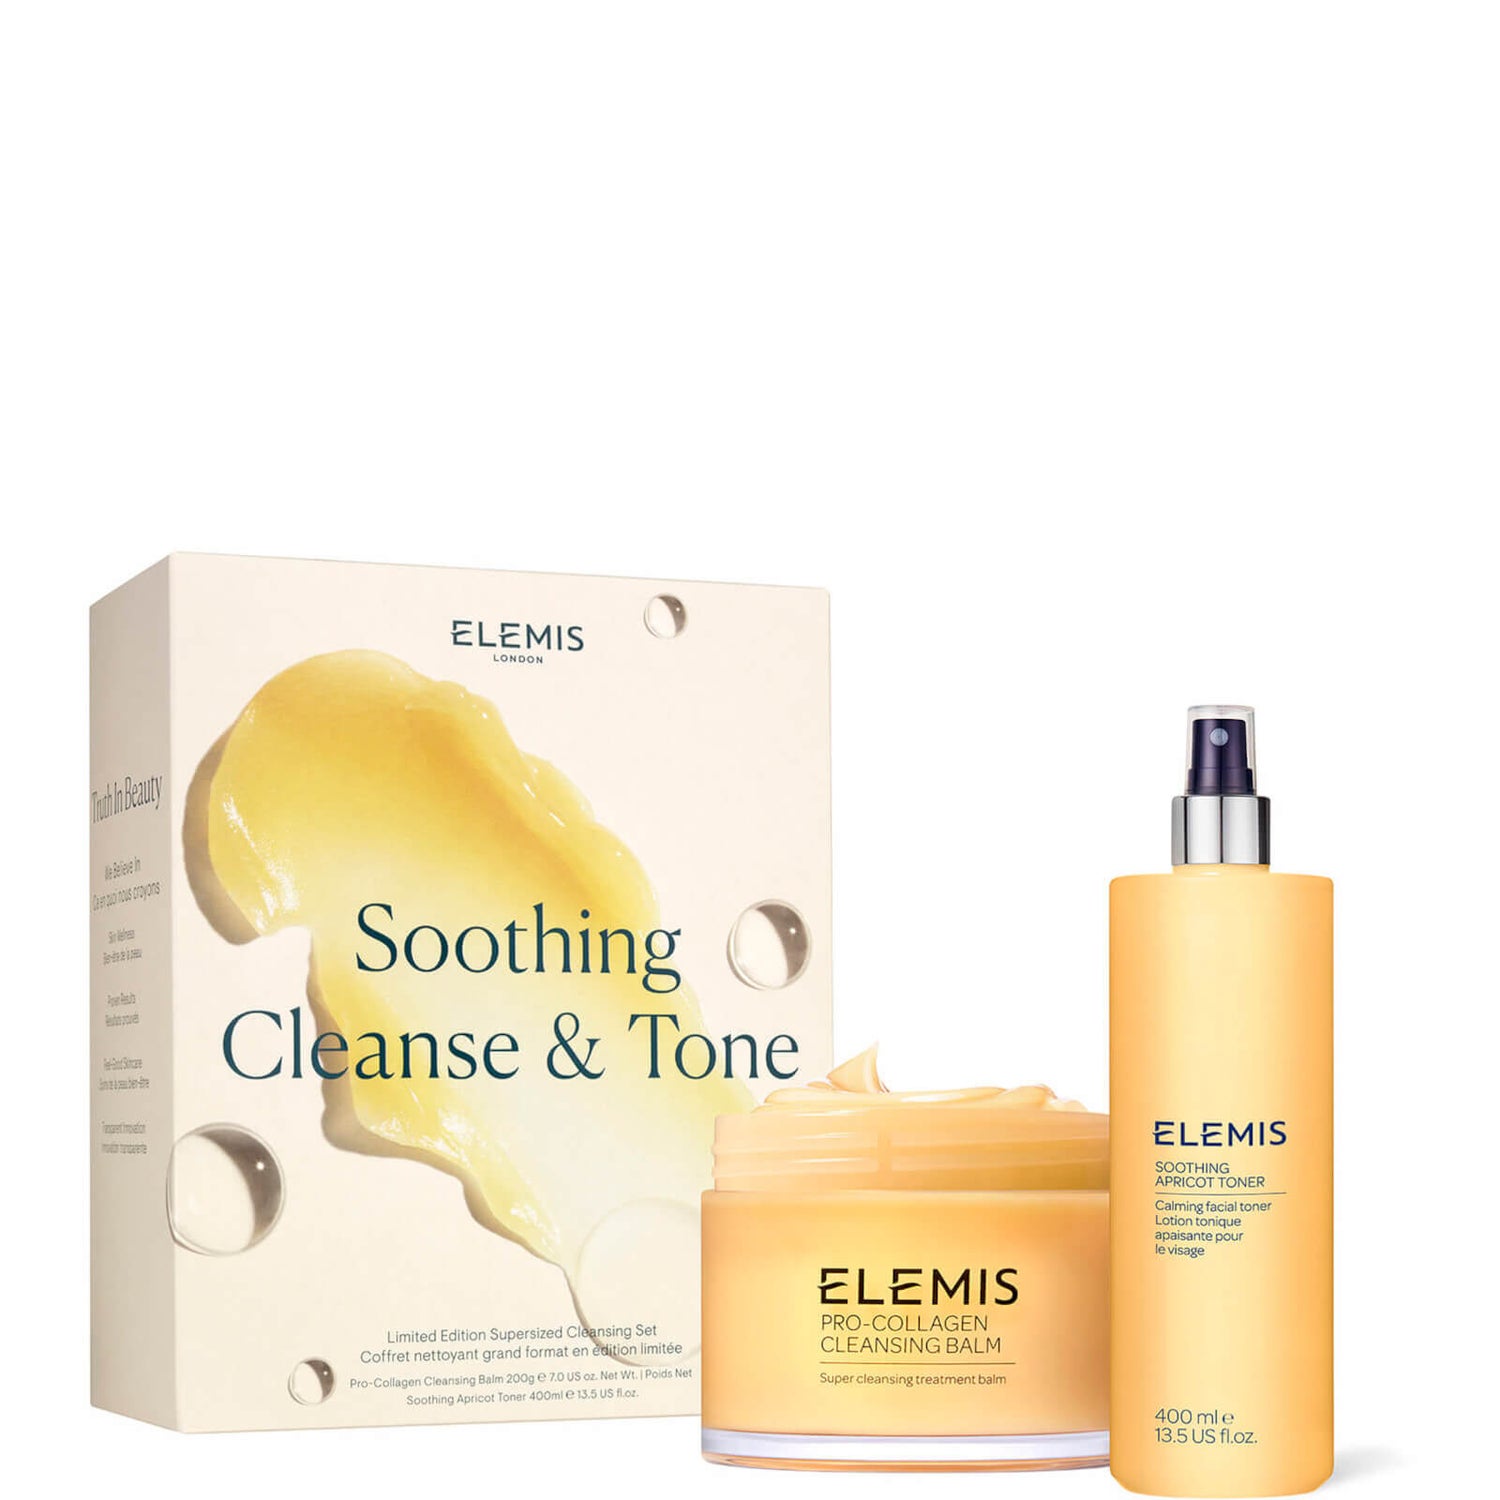 Soothing Cleanse and Tone